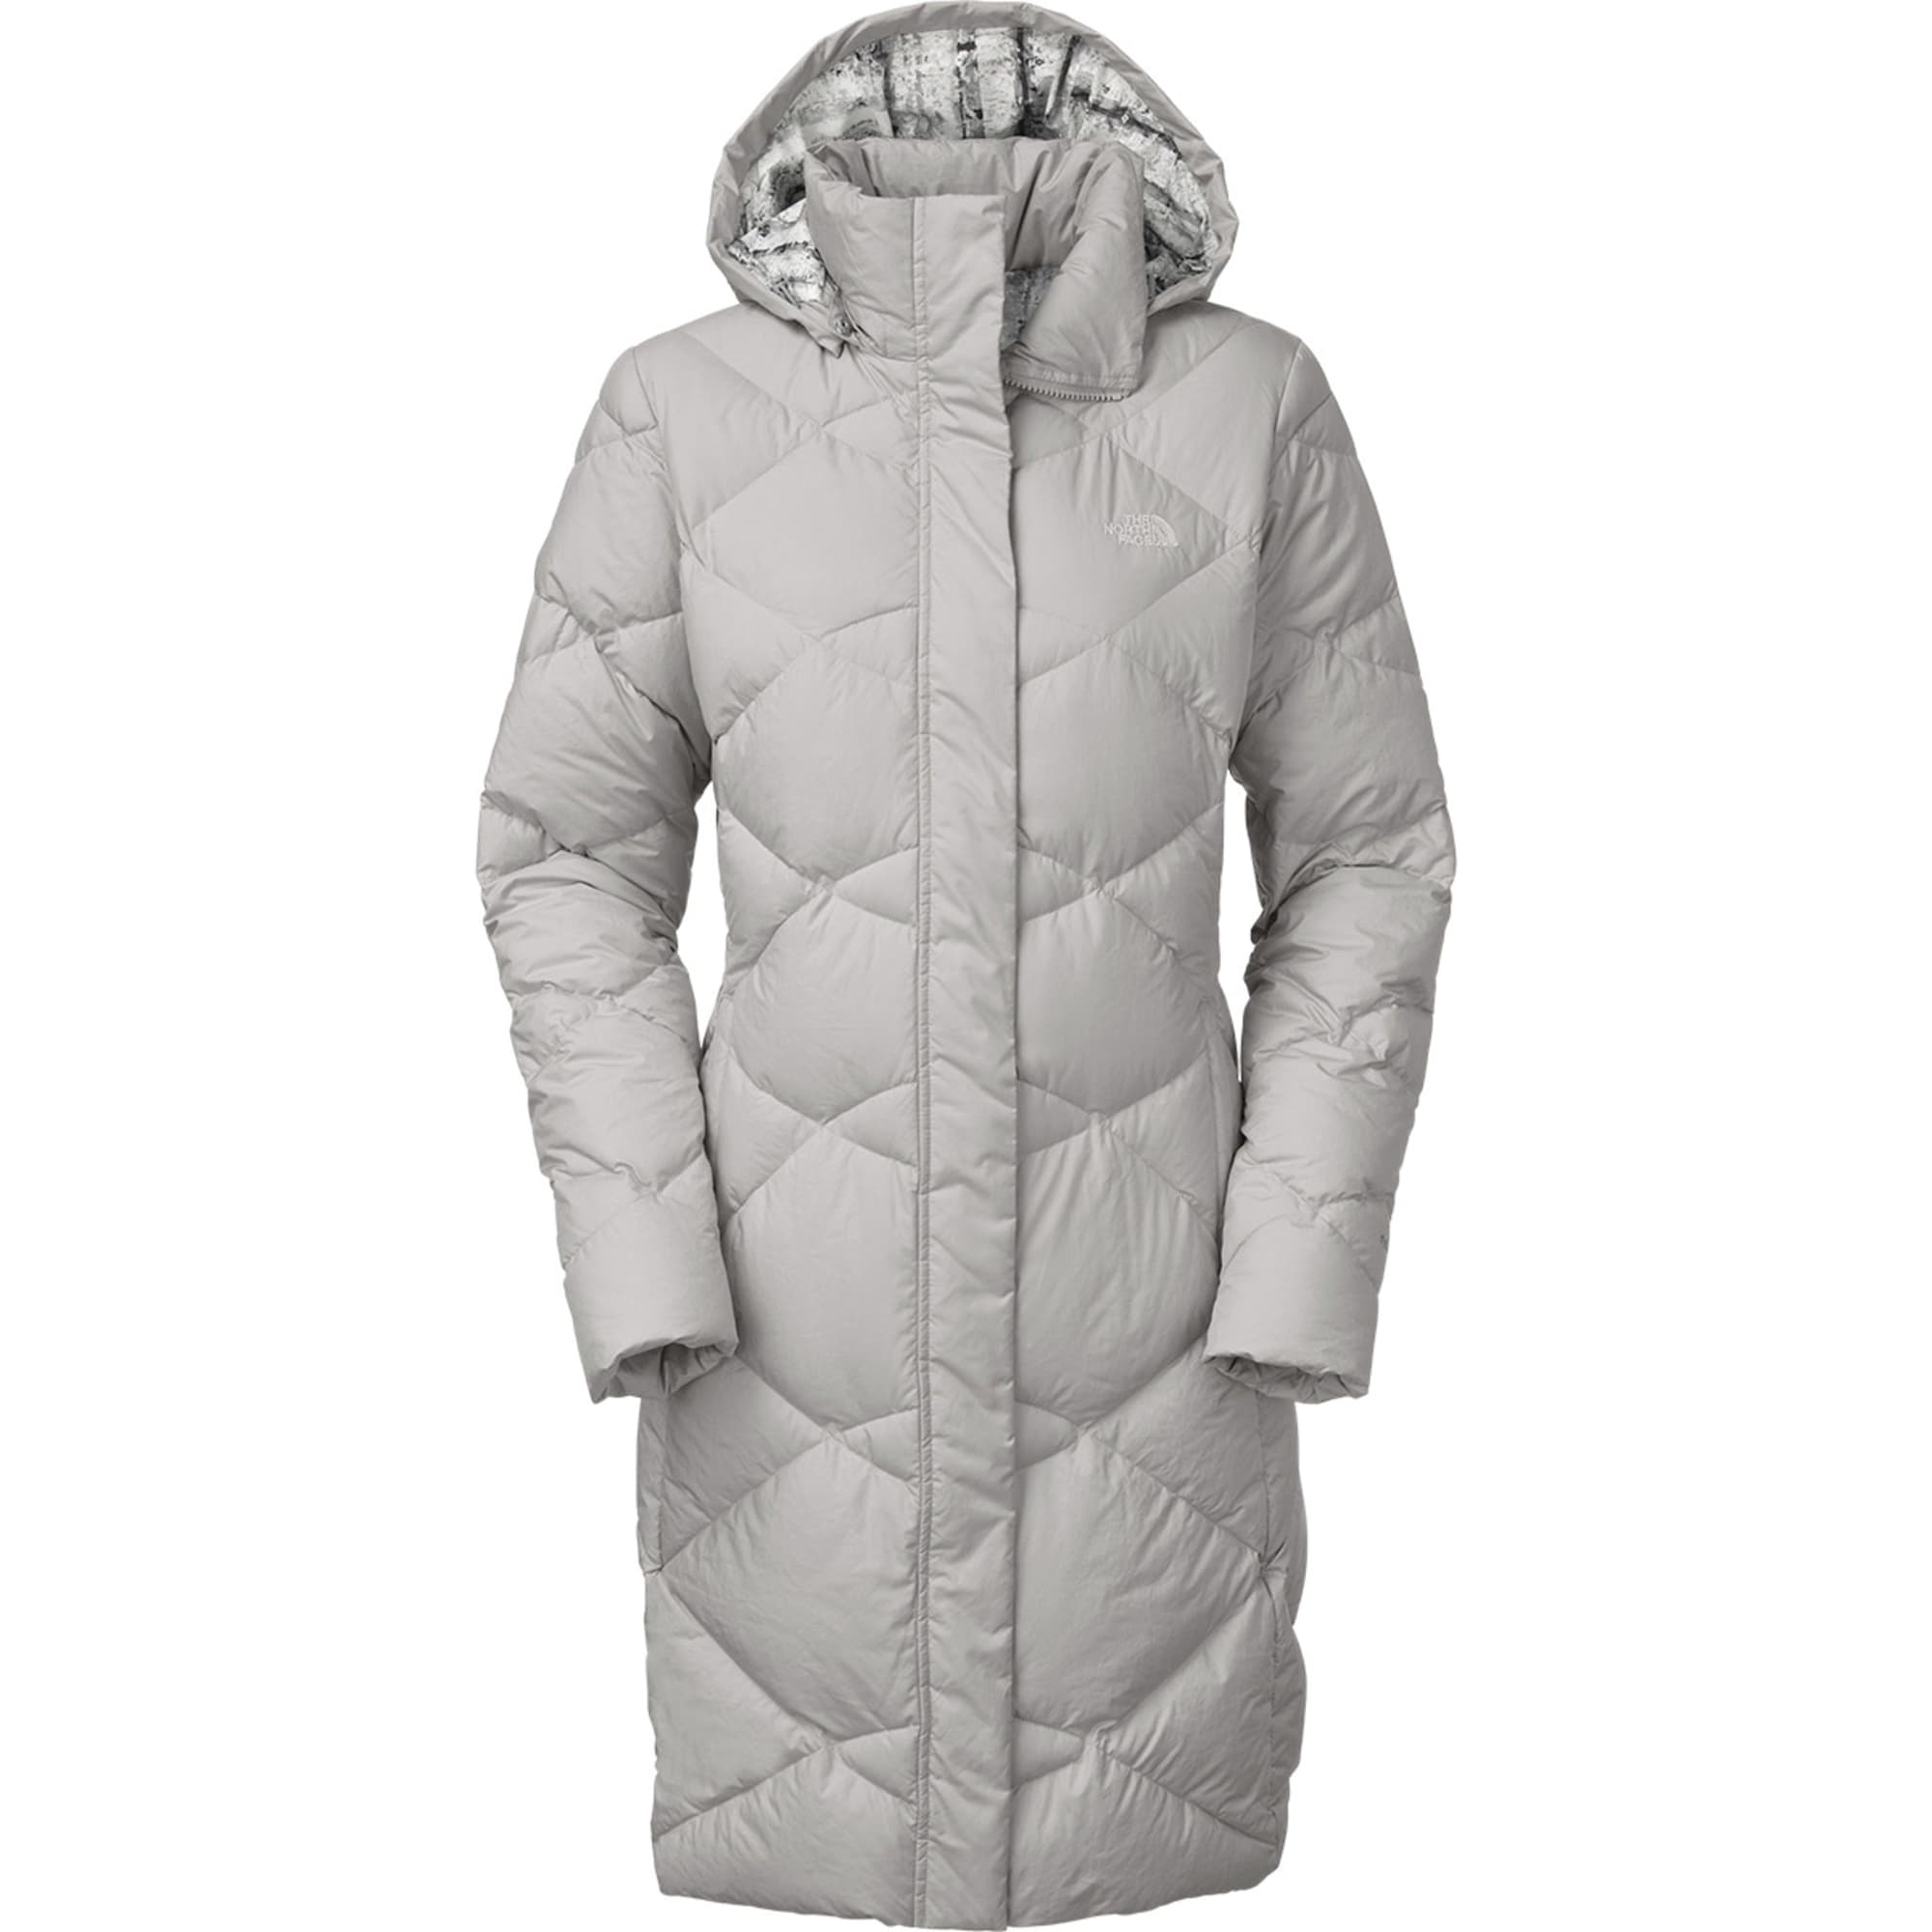 THE NORTH FACE Women's Miss Metro Parka